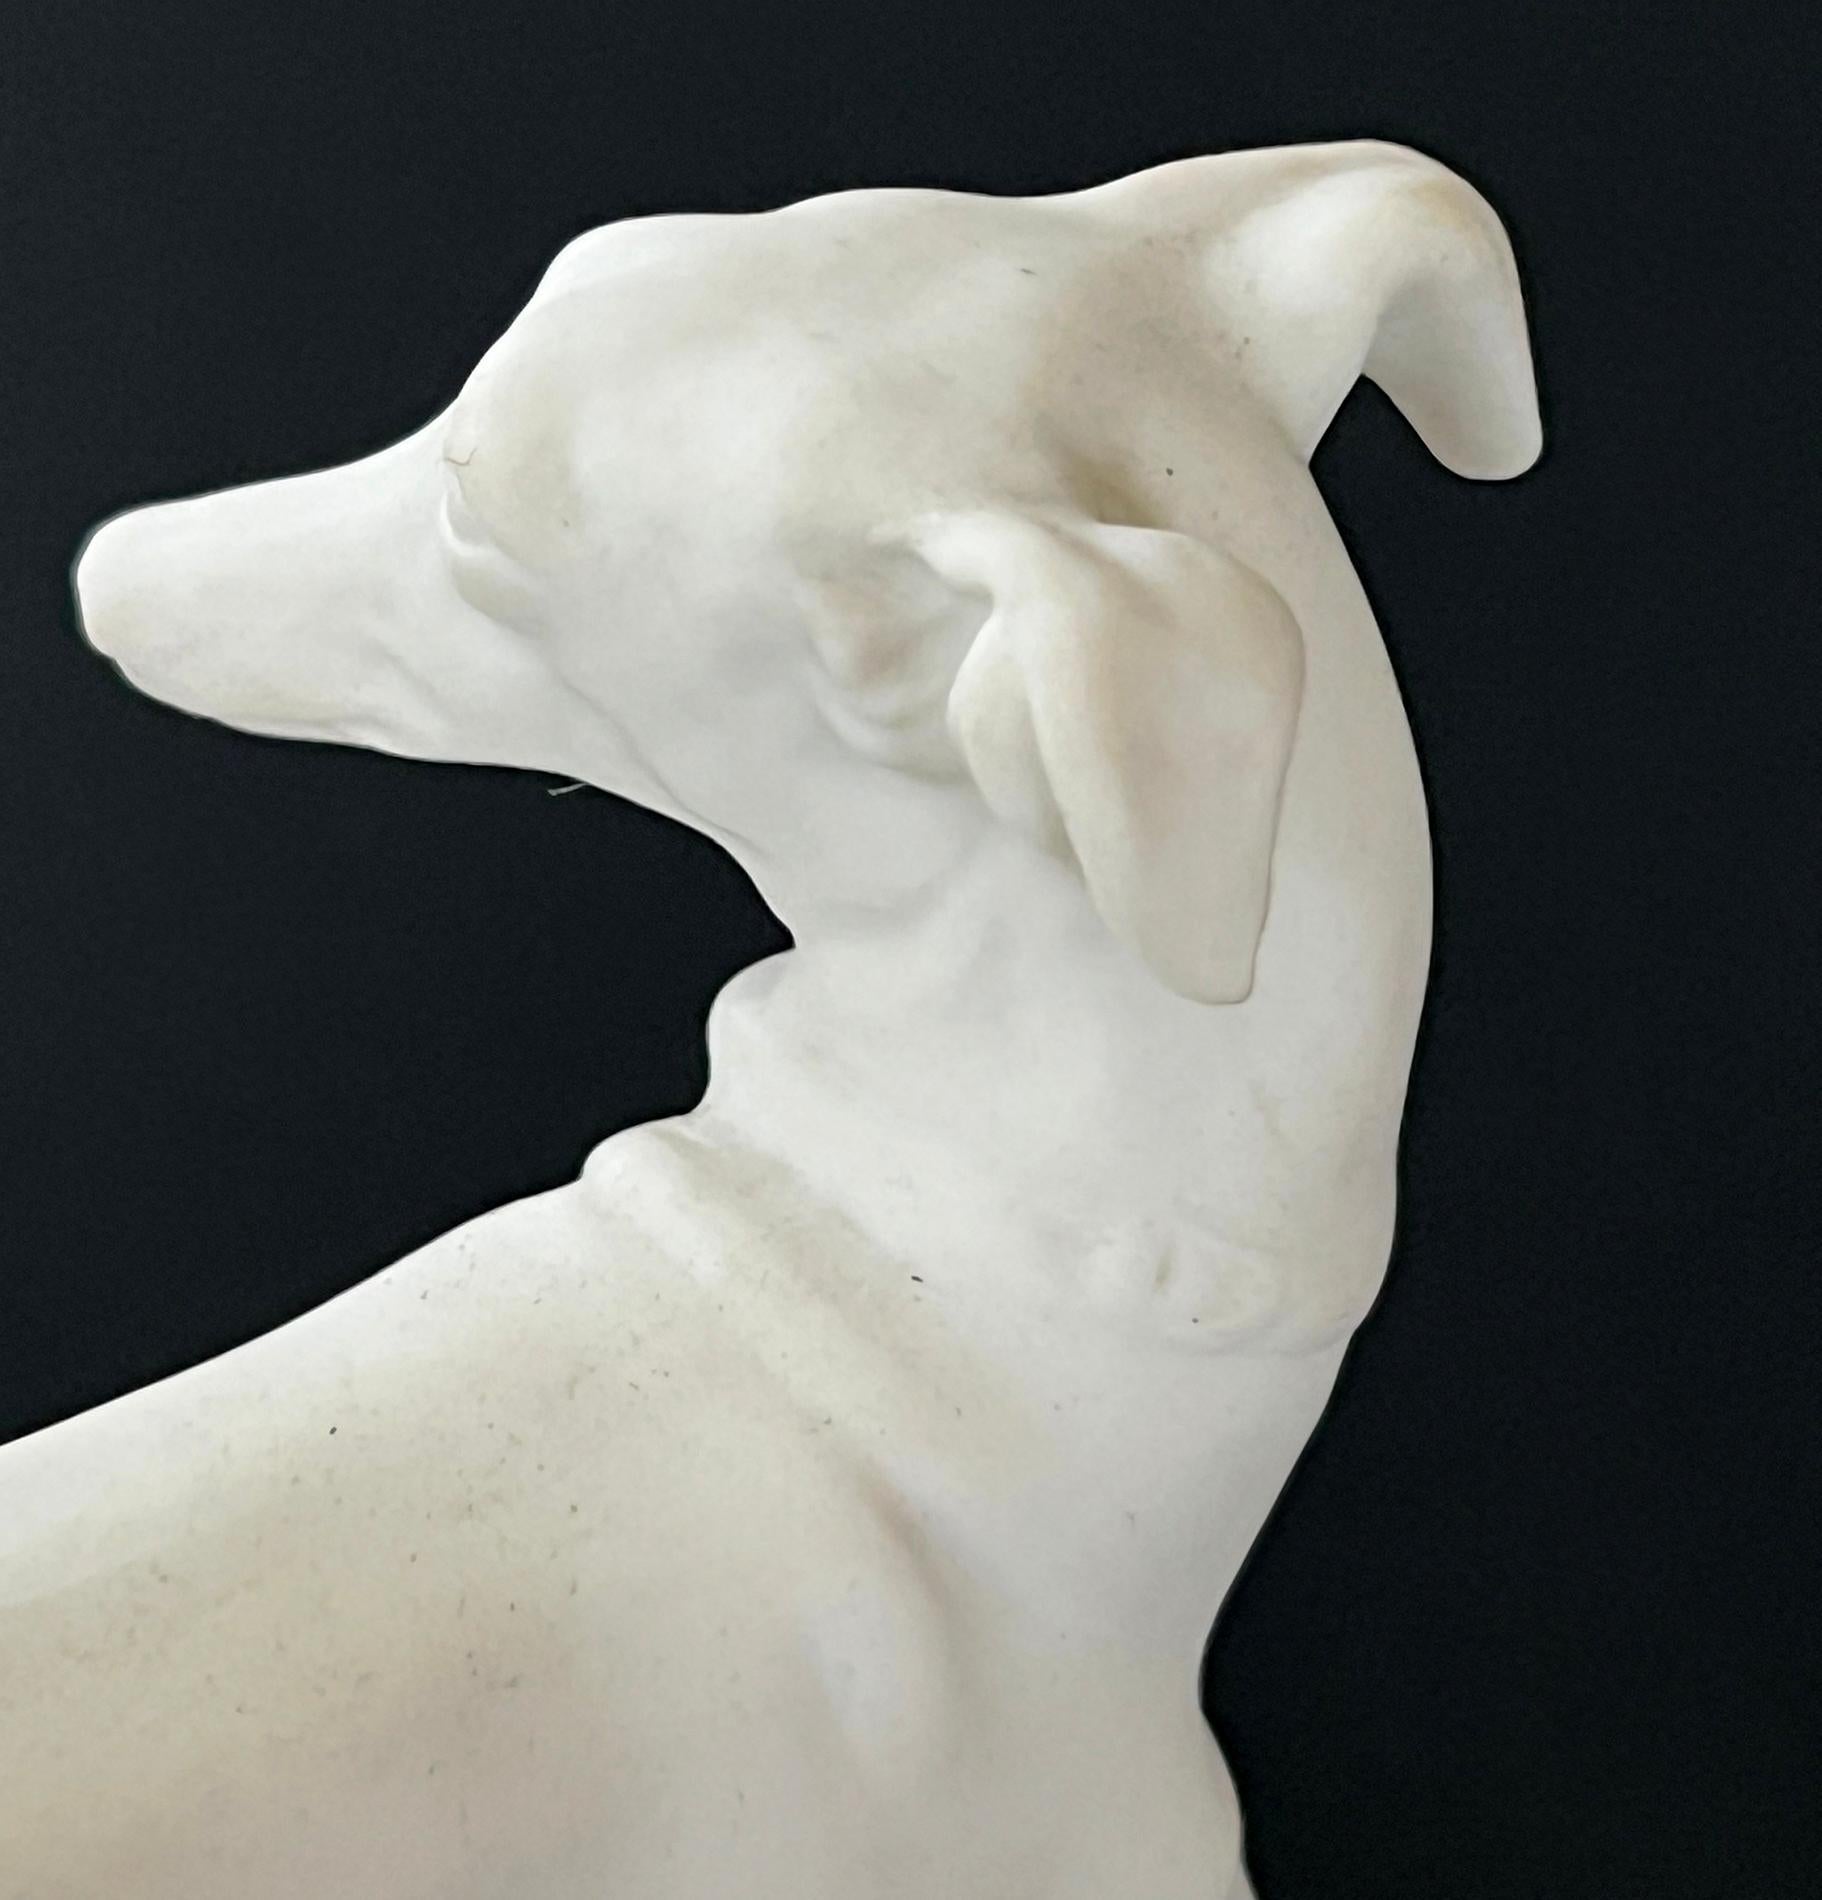 A Rare Pair of Bisque Porcelain Whippet Figurines by Boehm Studios In Good Condition For Sale In San Francisco, CA